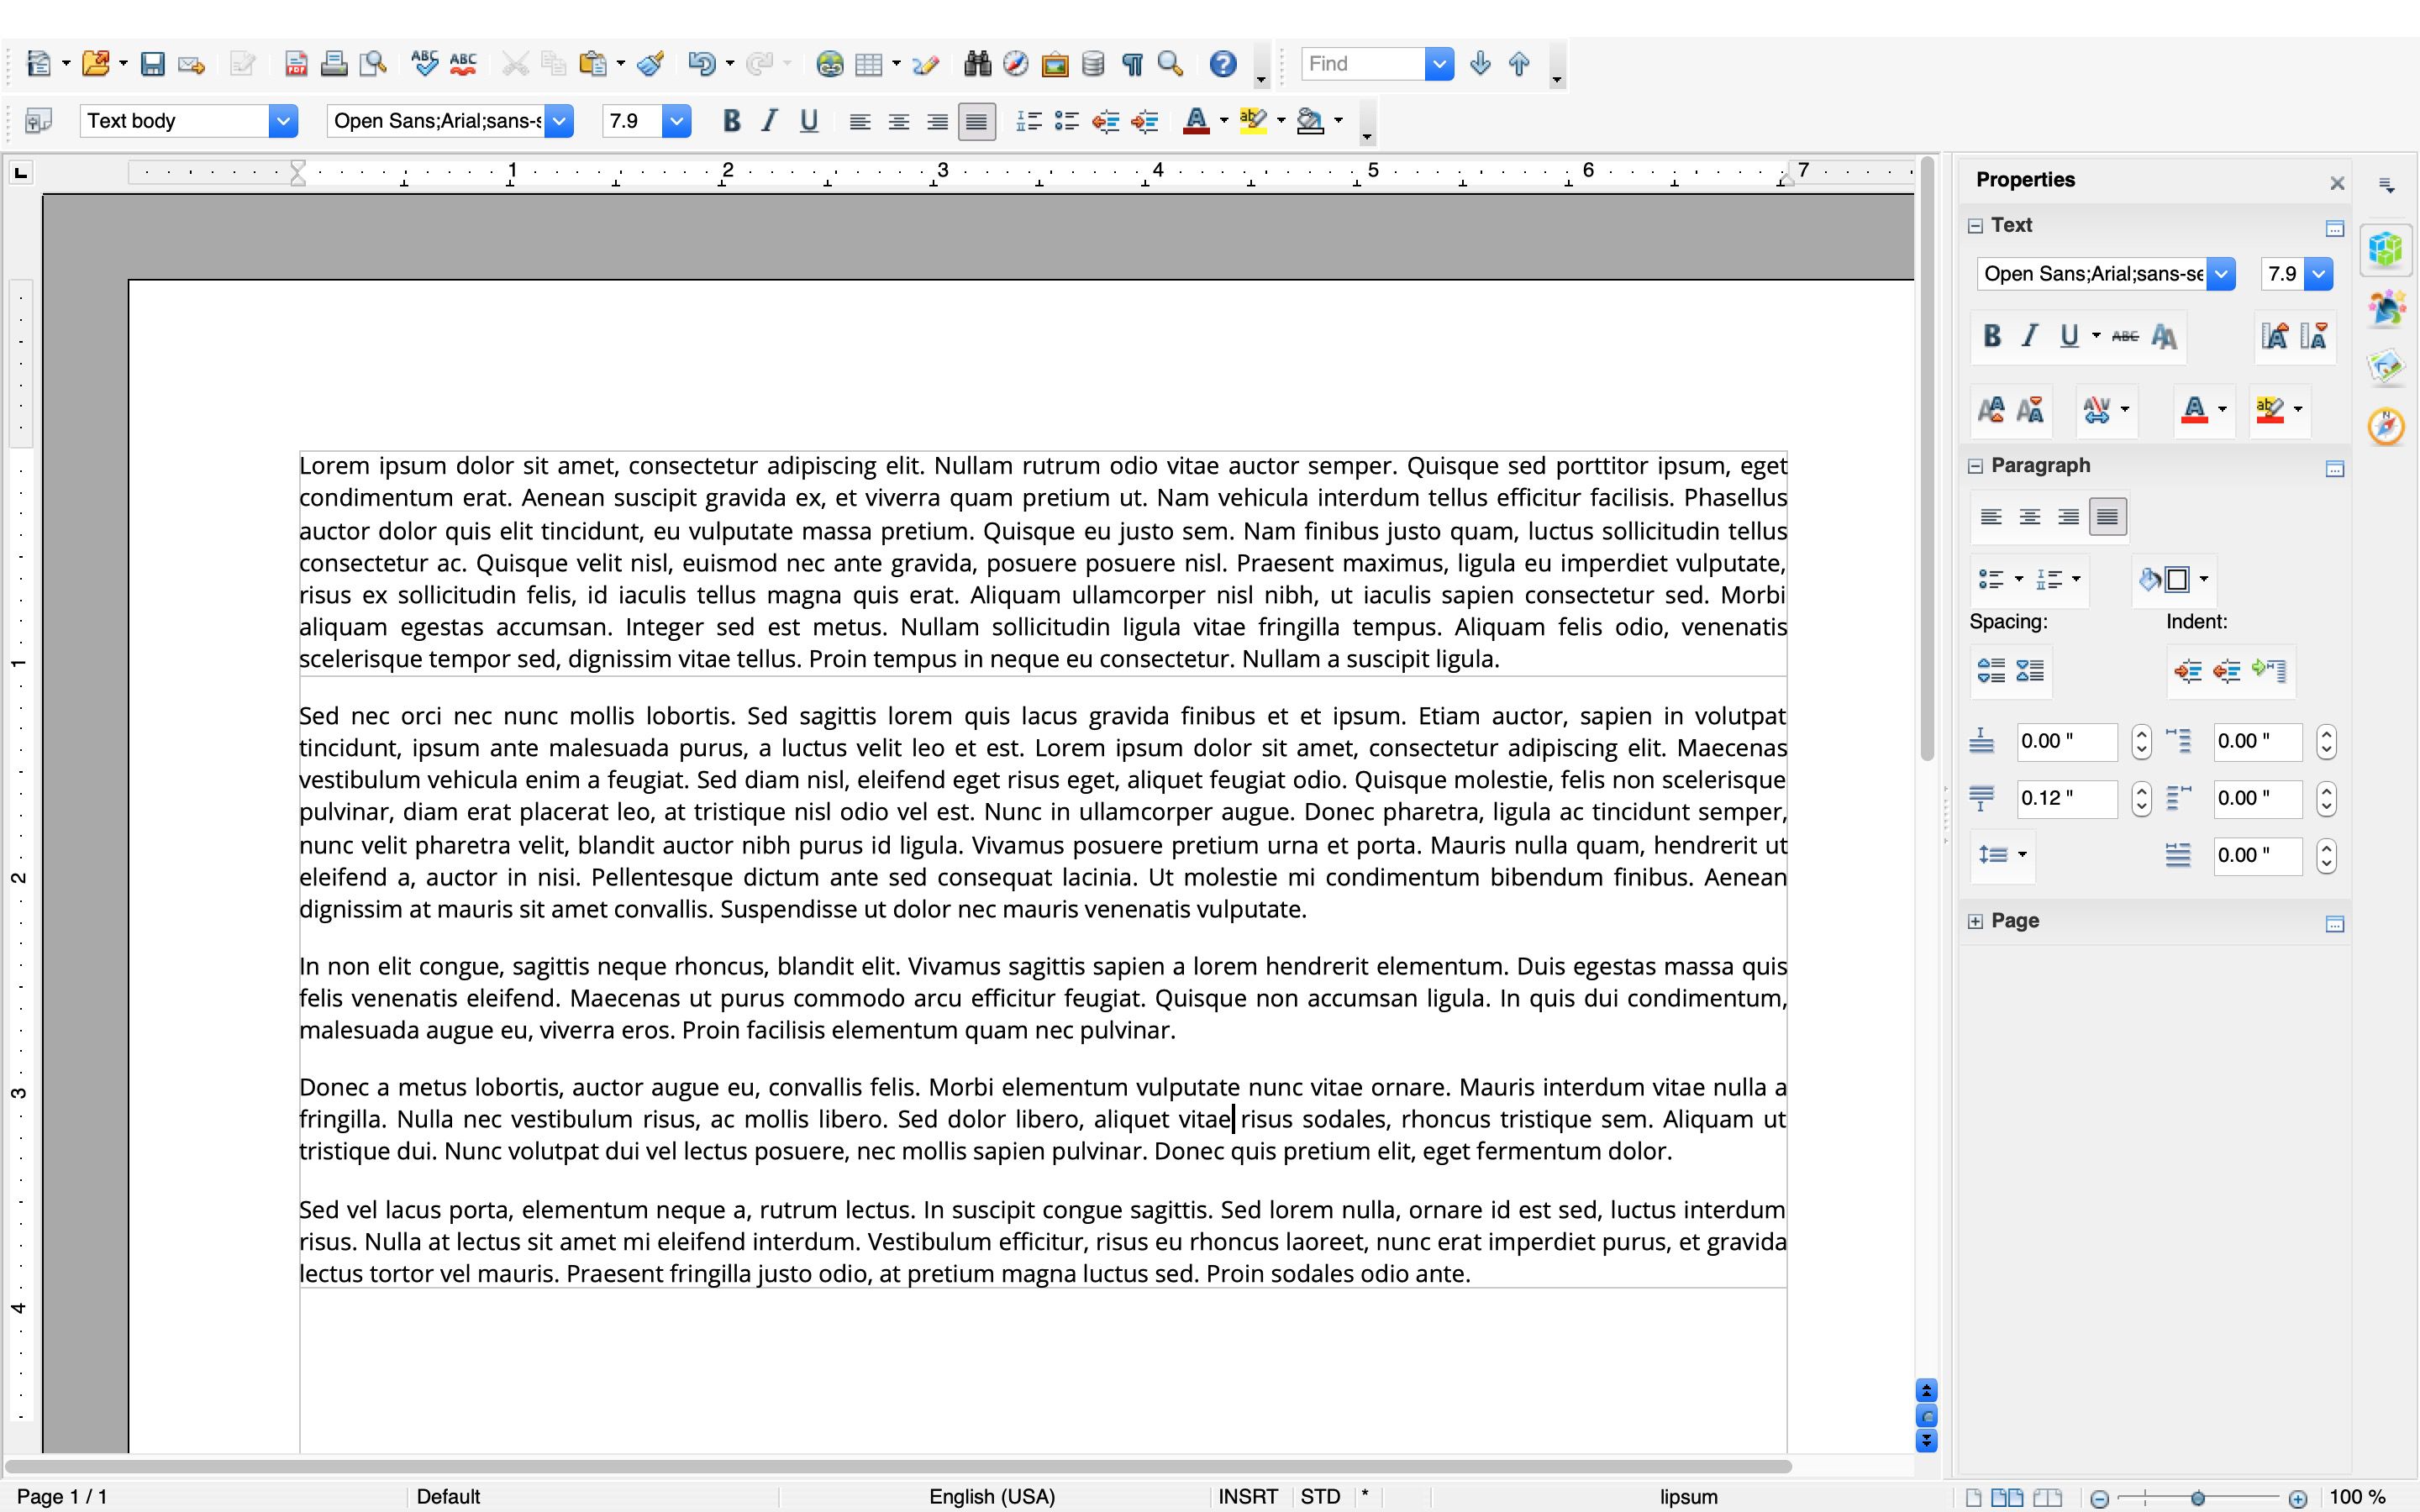 open source word processor for mac